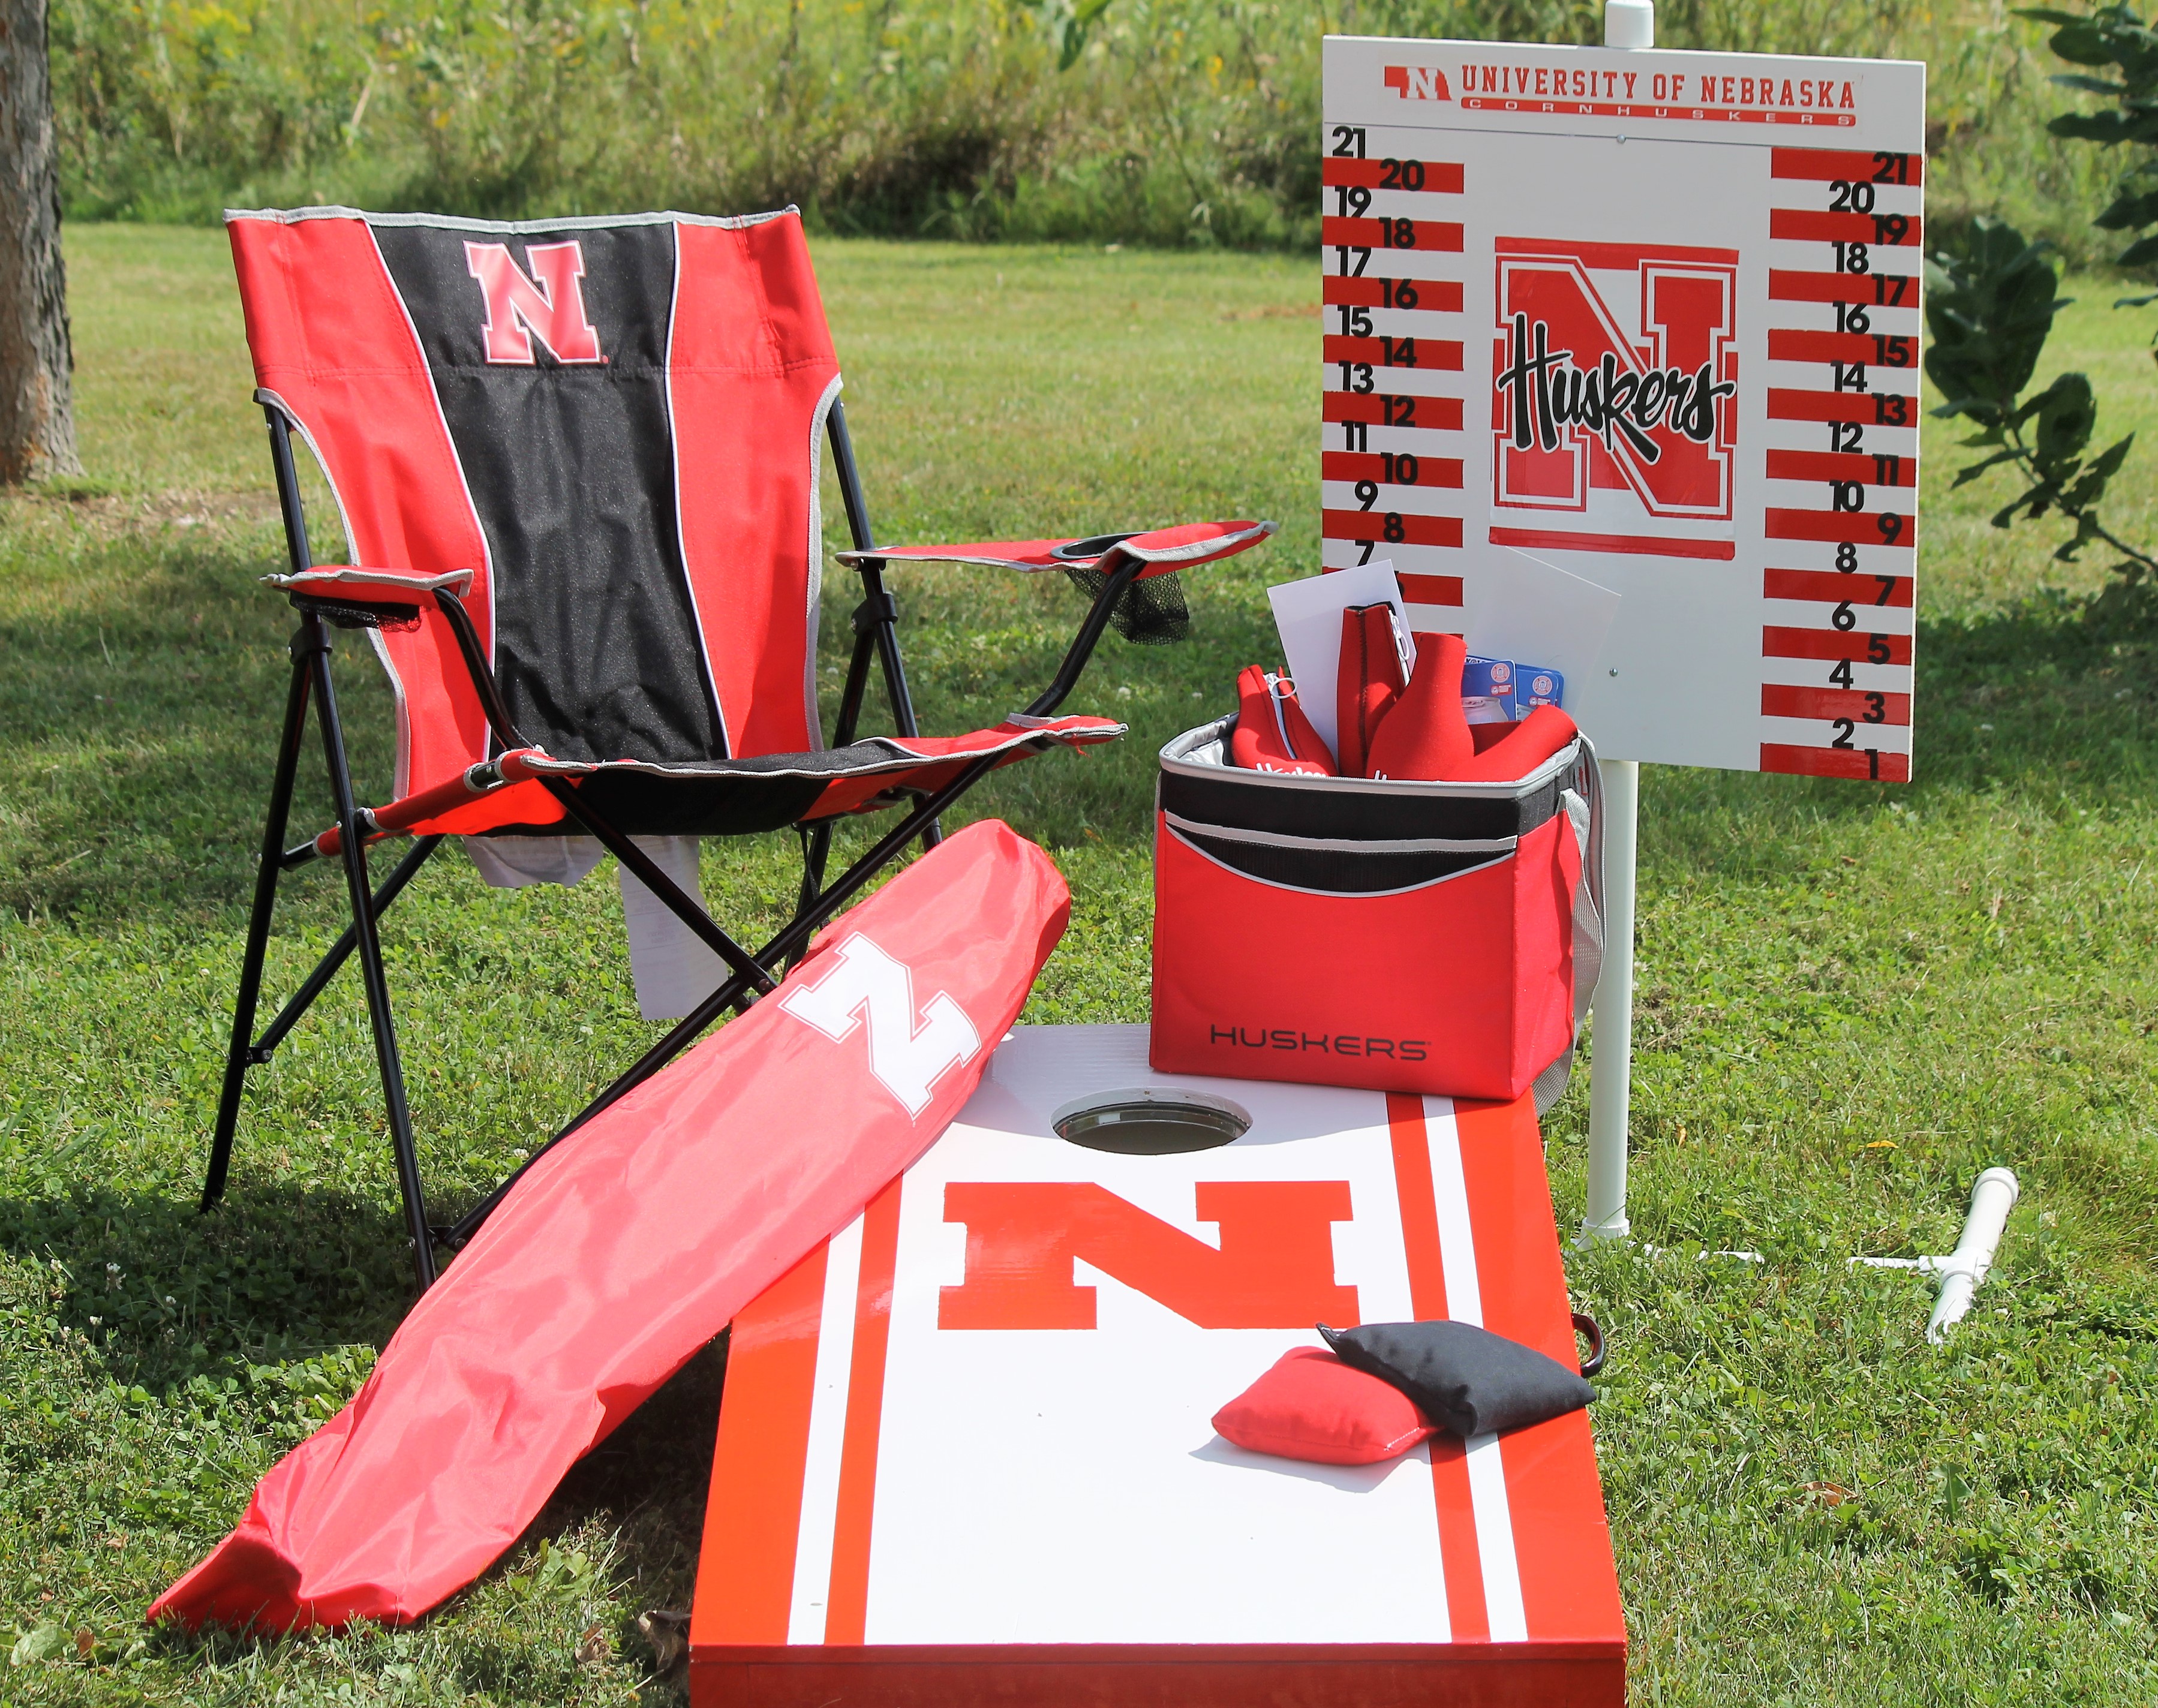 Husker recreation set of cornhole game and gifts